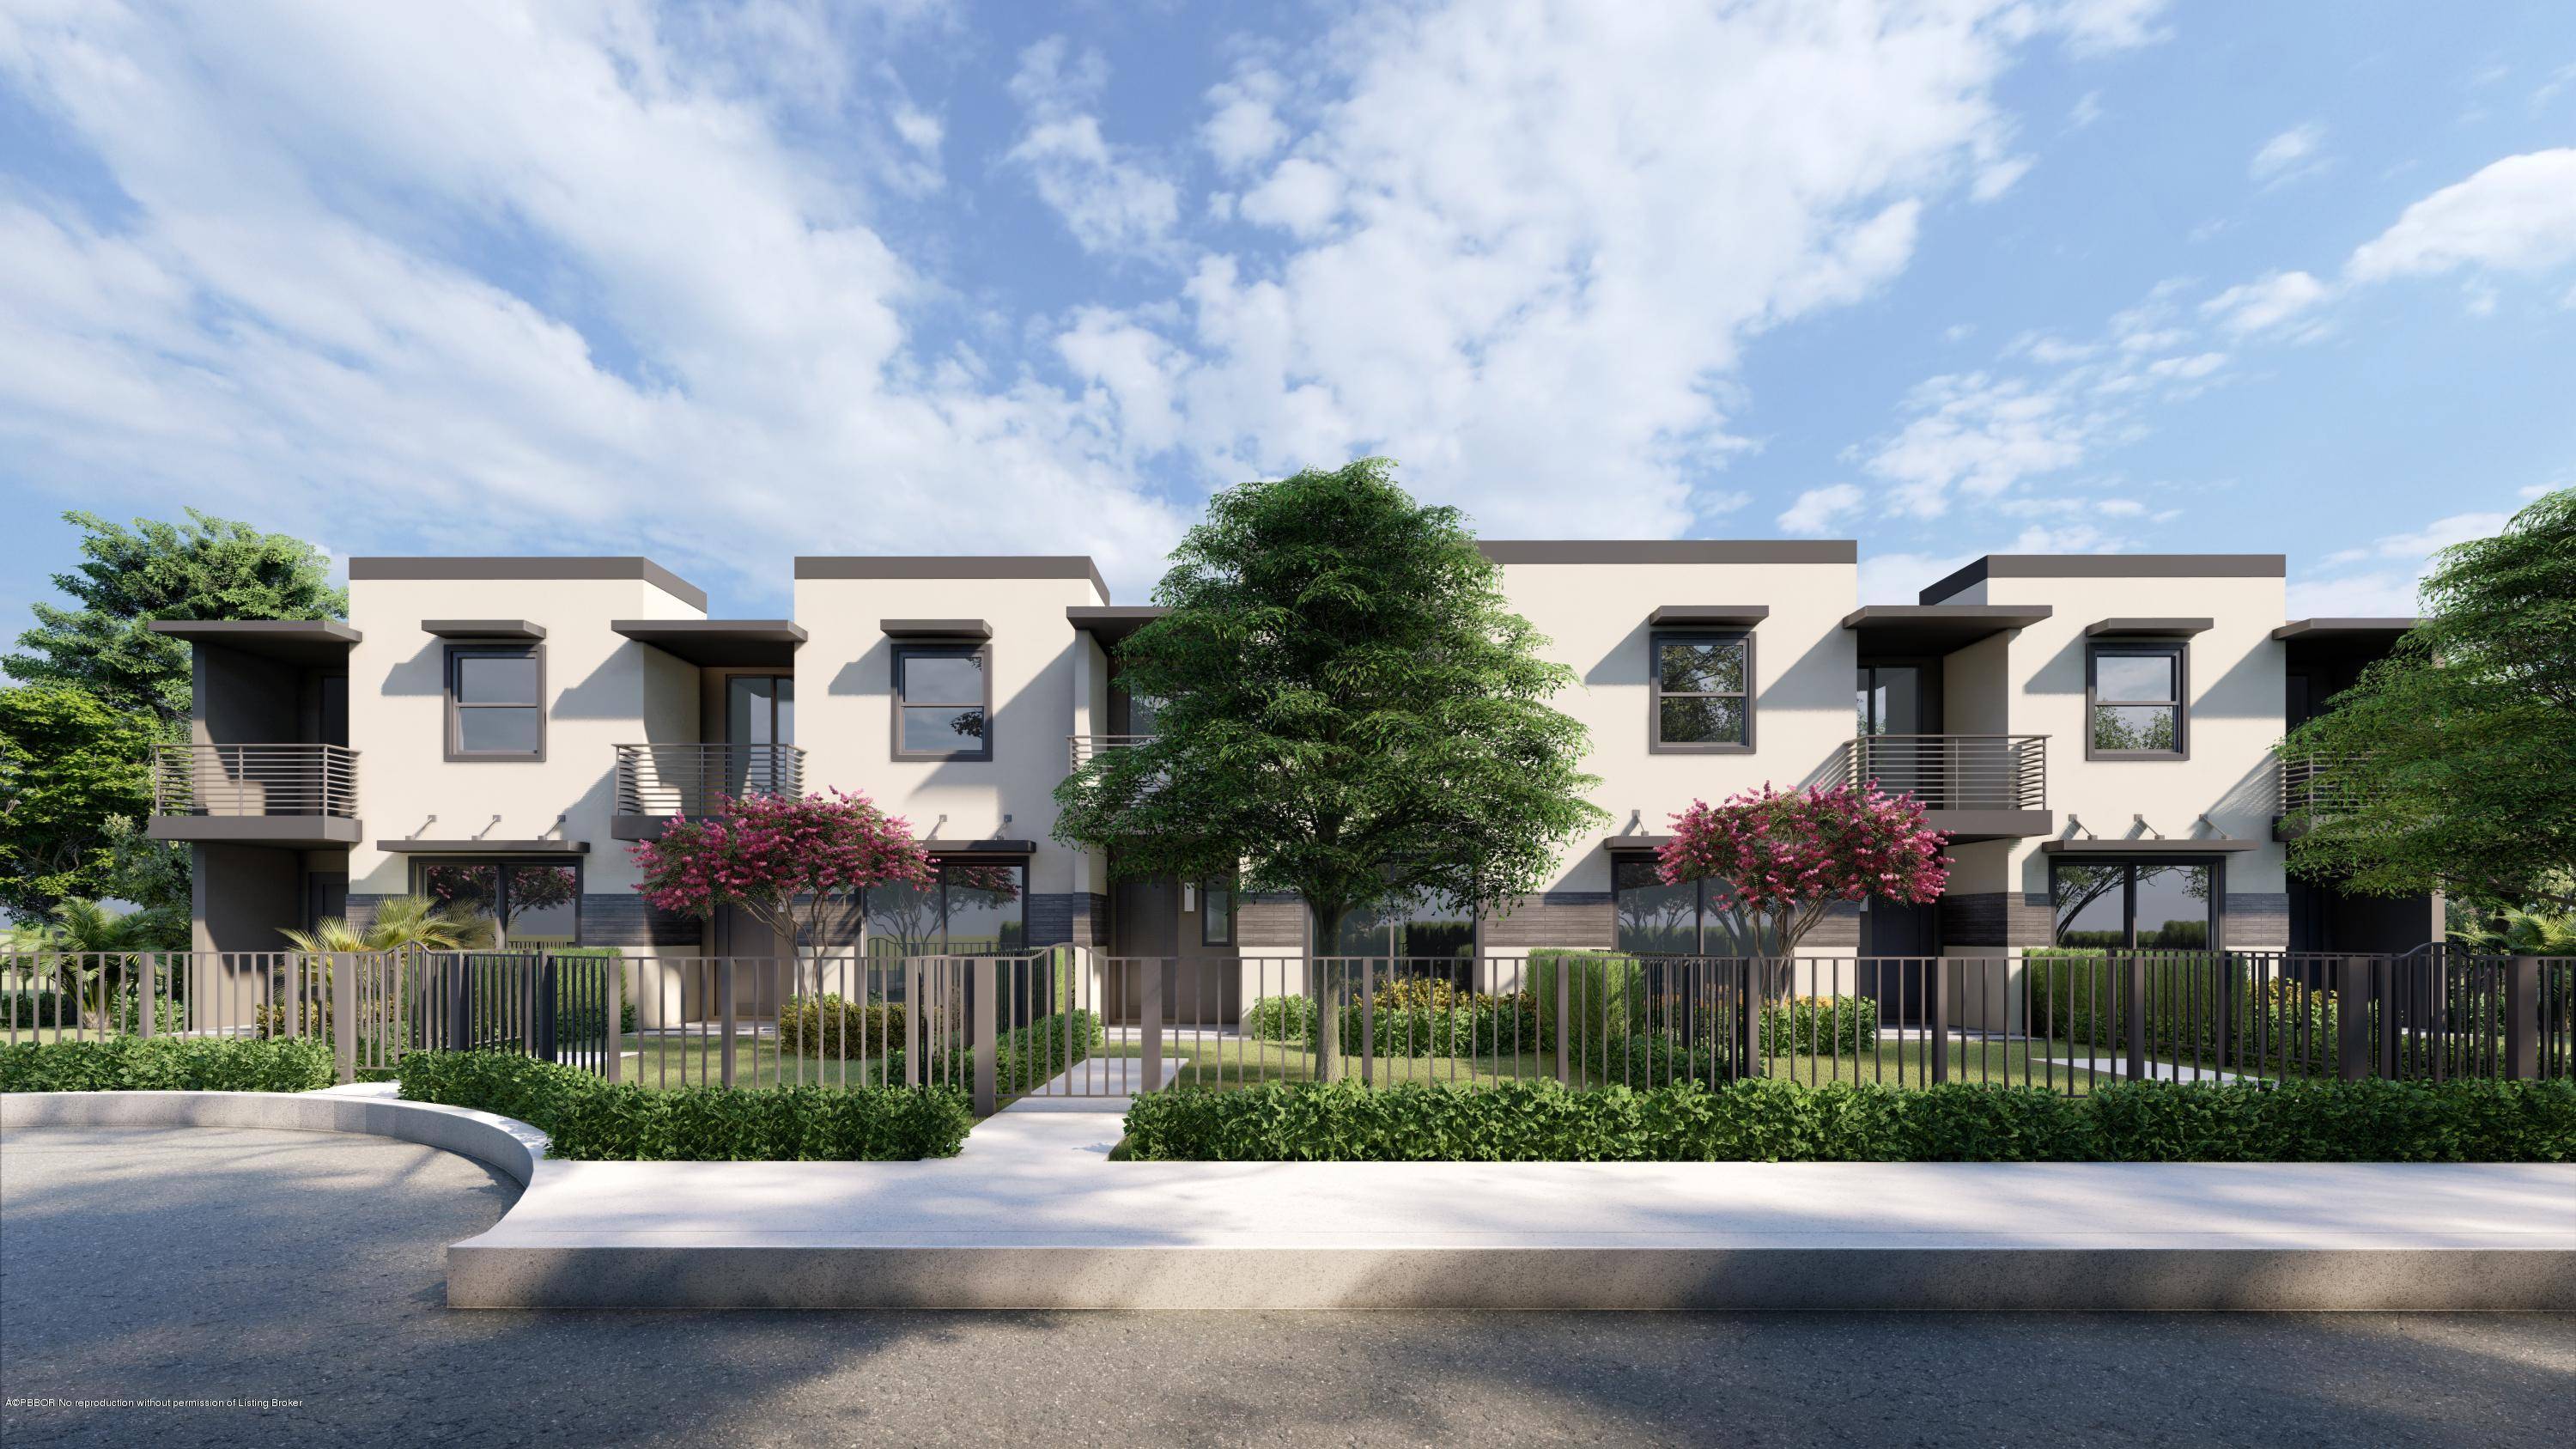 Introducing 38 SOUTH, New Construction Townhomes in the heart of Downtown West Palm Beach, providing the ultimate Urban living.